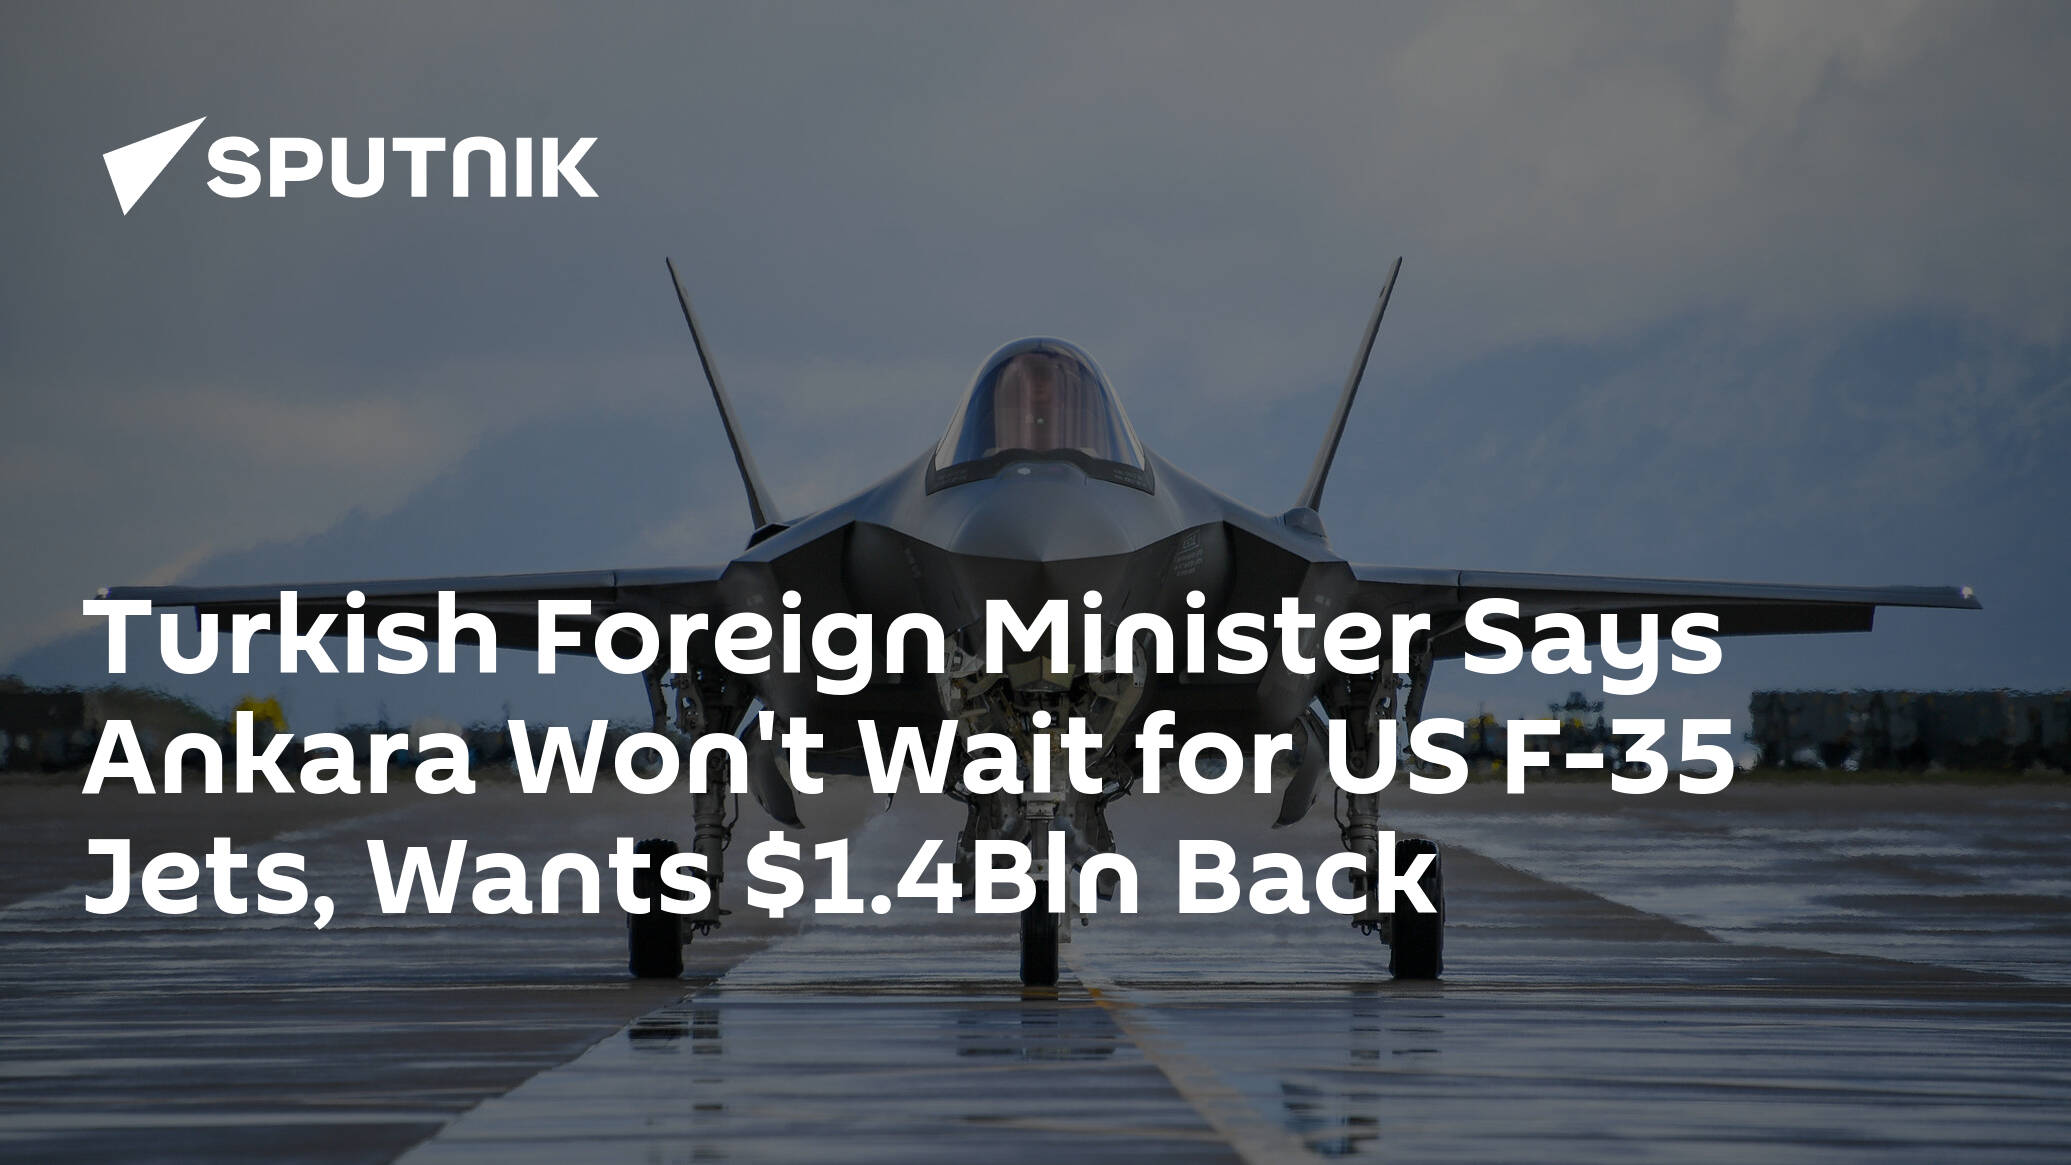 Turkish Foreign Minister Says Ankara Won't Wait for US F-35 Jets, Wants .4Bln Back